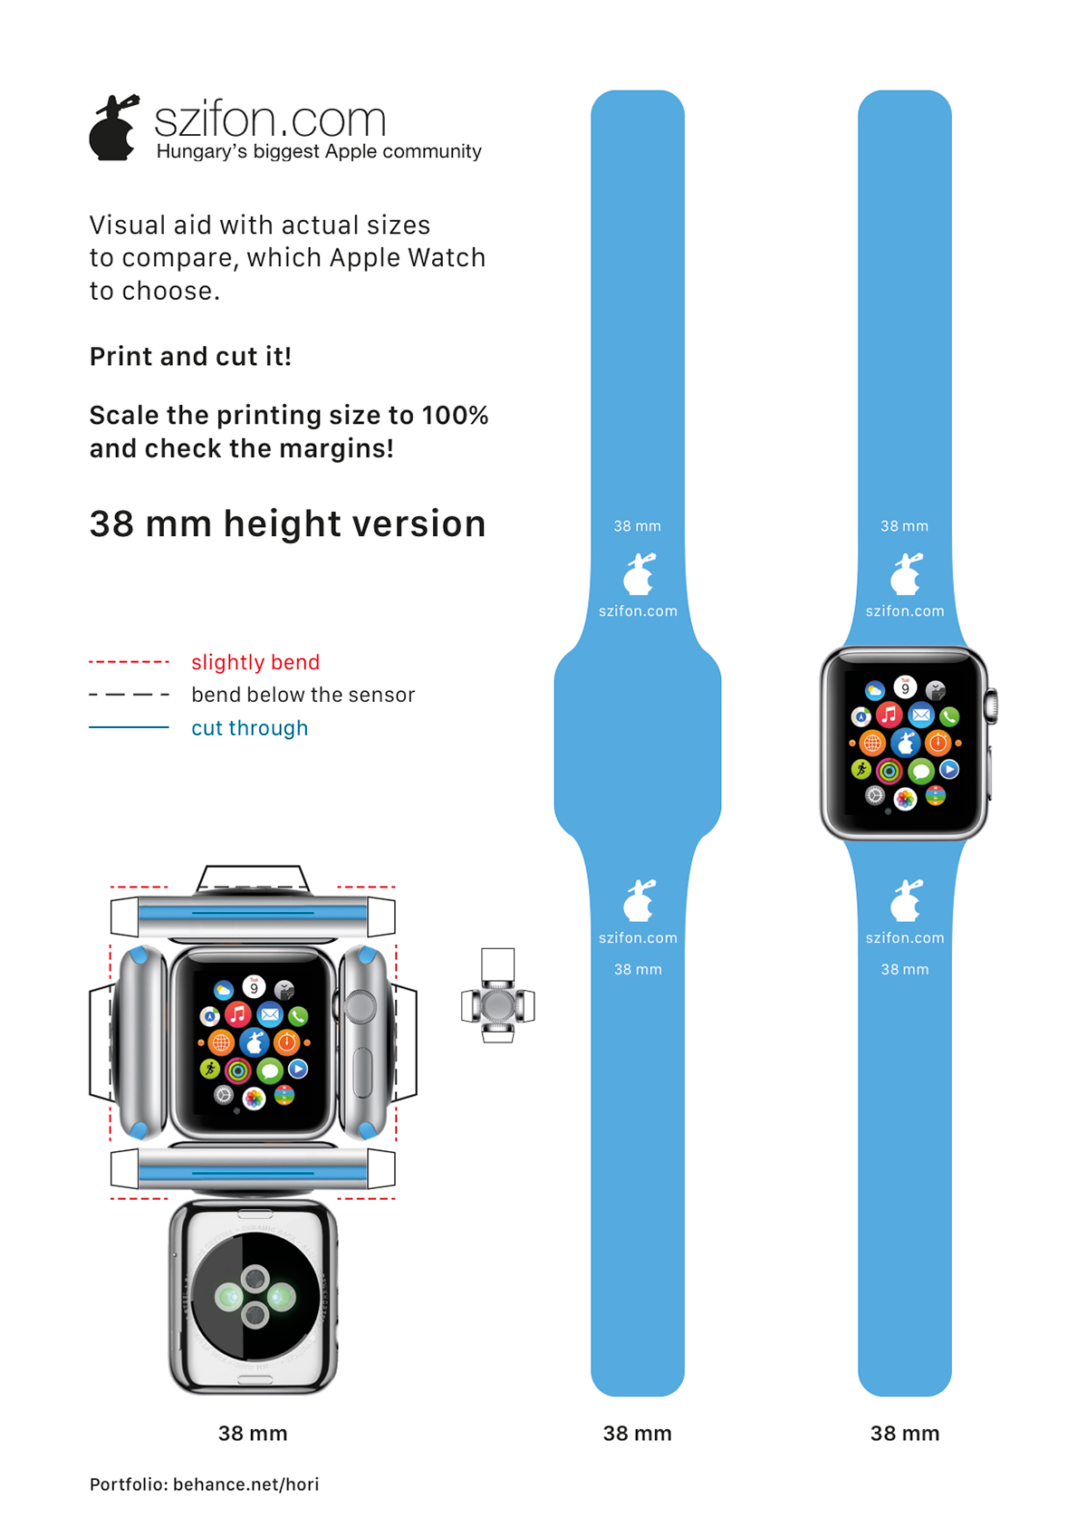 apple-watch-papercraft-with-actual-sizes-on-behance-apple-watch-paper-crafts-paper-toys-template